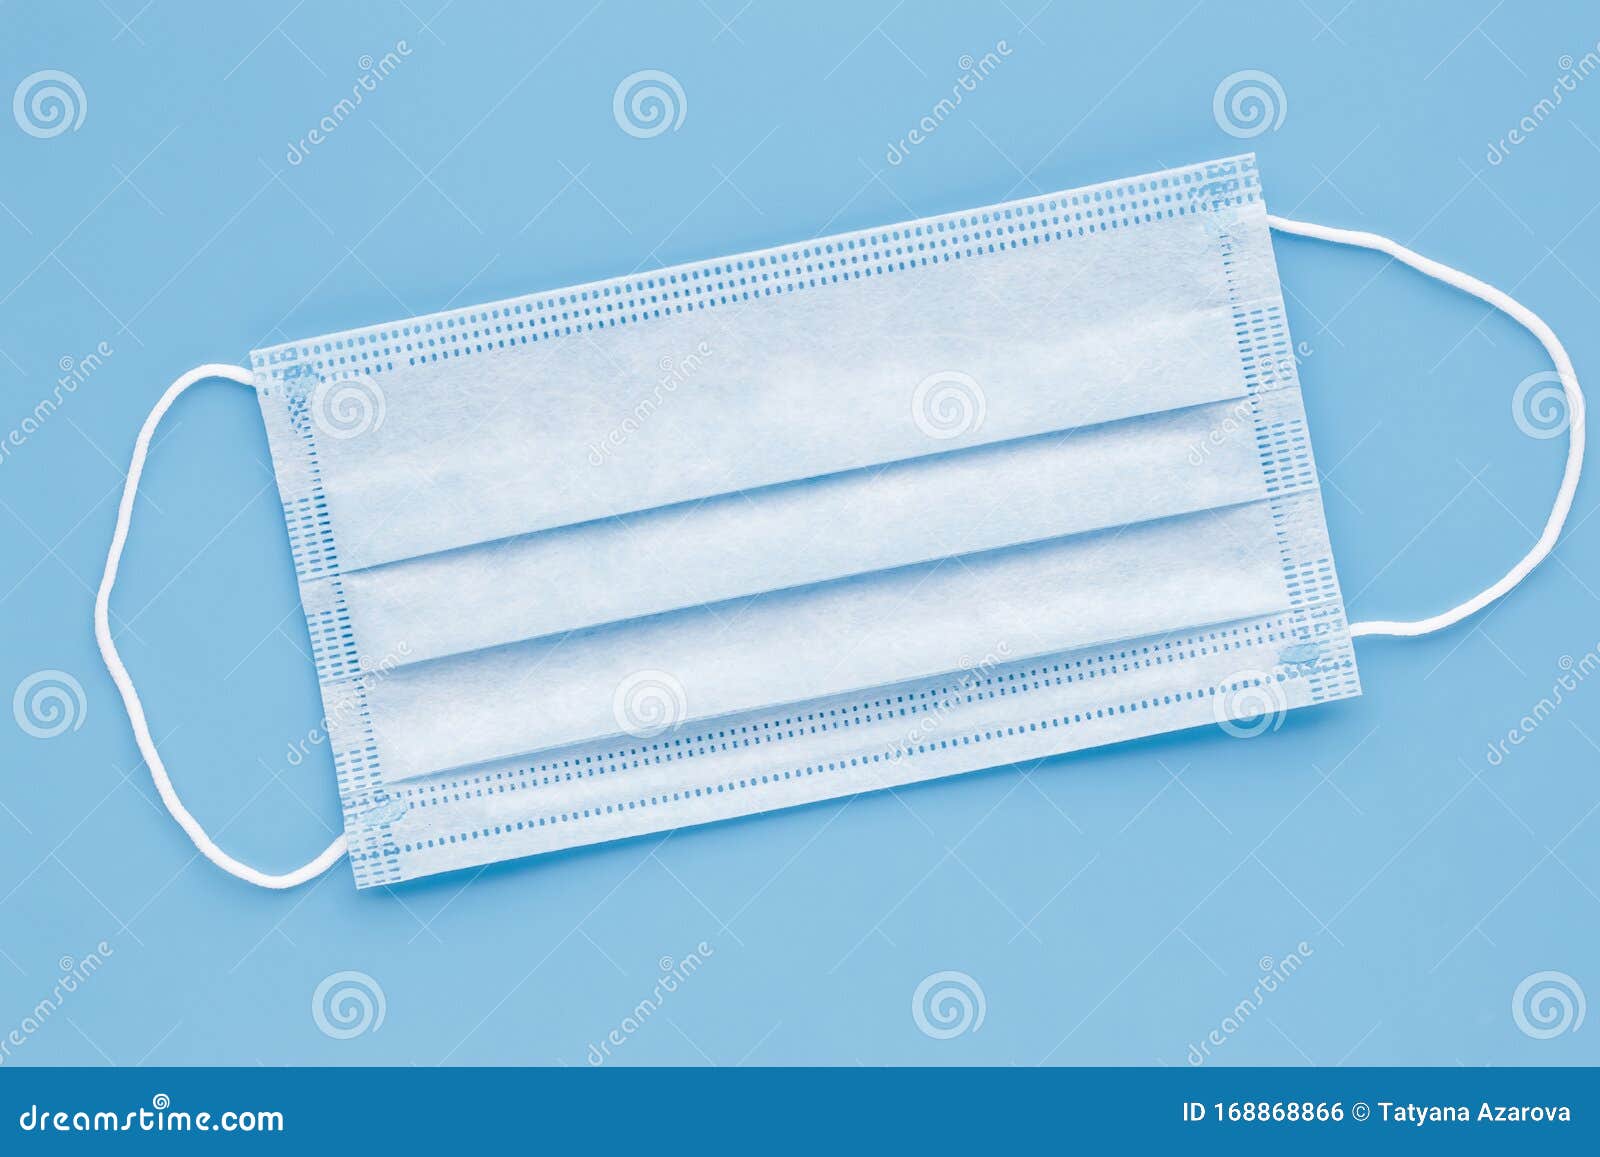 surgical mask with rubber ear straps. typical 3-ply surgical mask to cover the mouth and nose. procedure mask from bacteria.